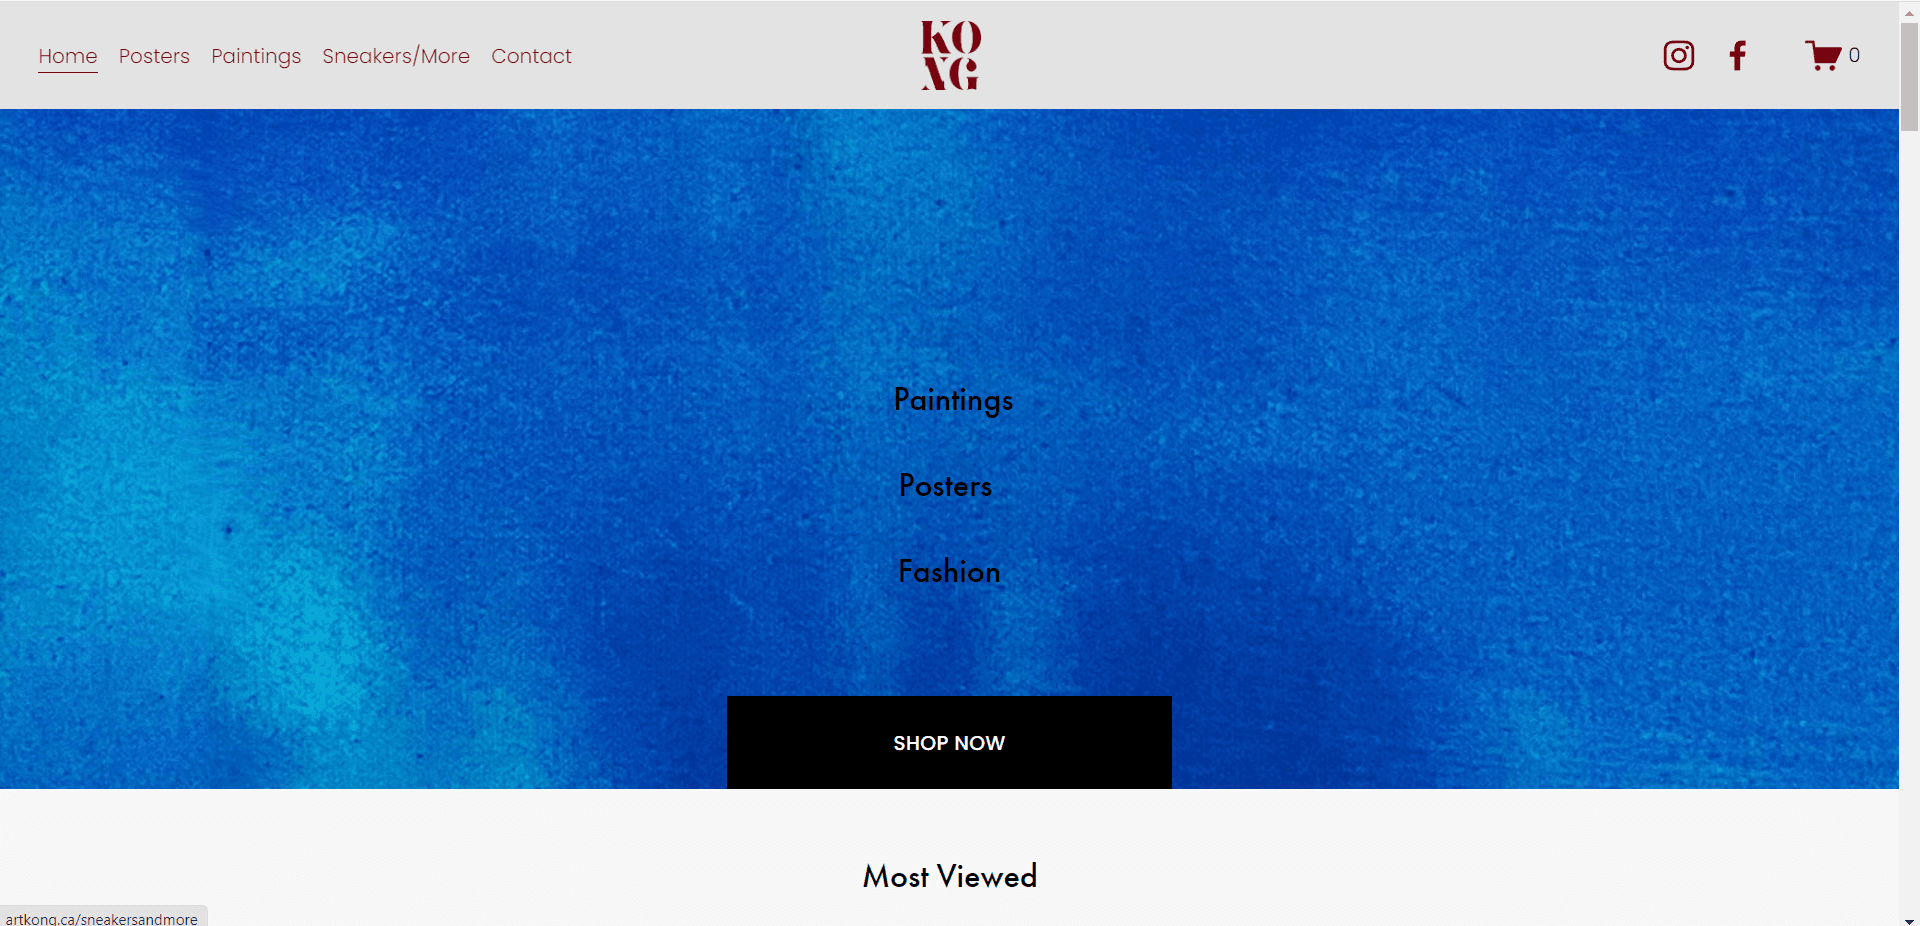 Art Kong home page screenshot, with a large 'splash' section, a navigation bar, and a large shop now button